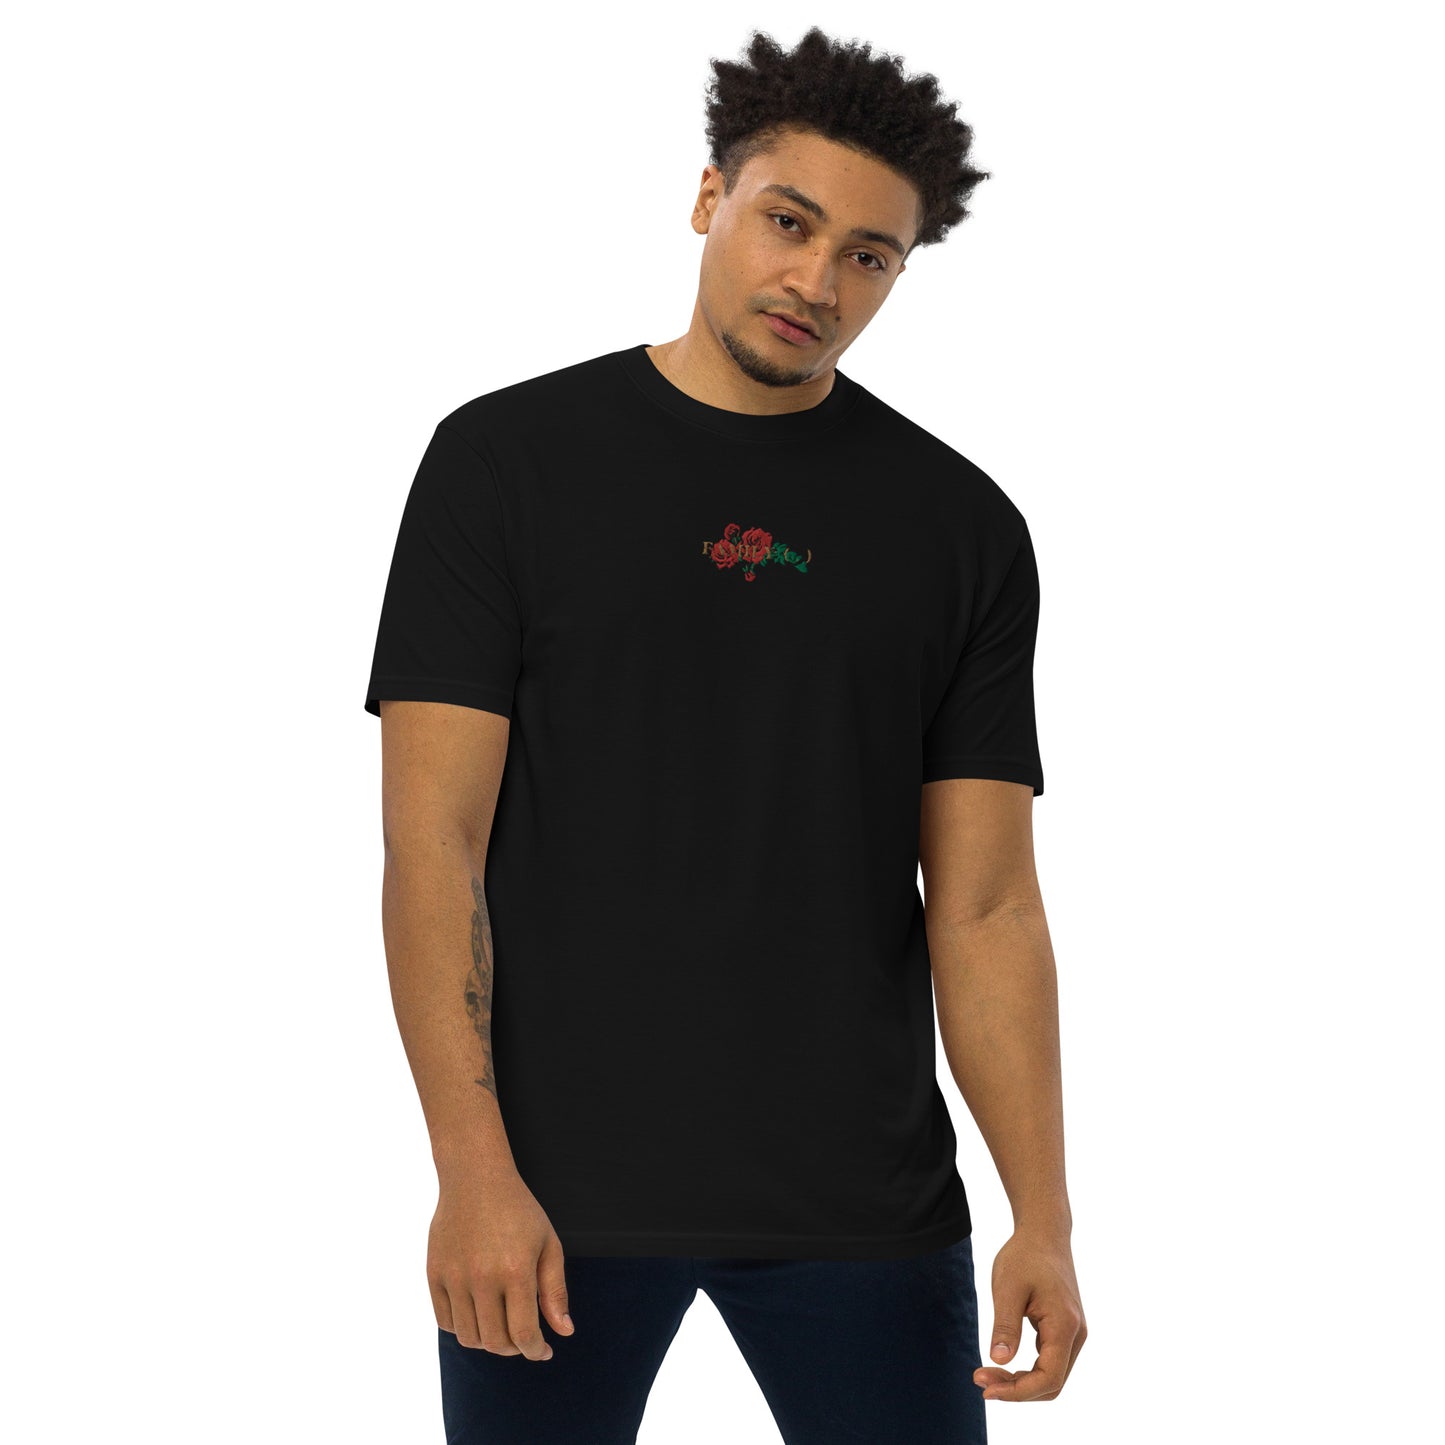 Give Them Their Flowers Premium Tee